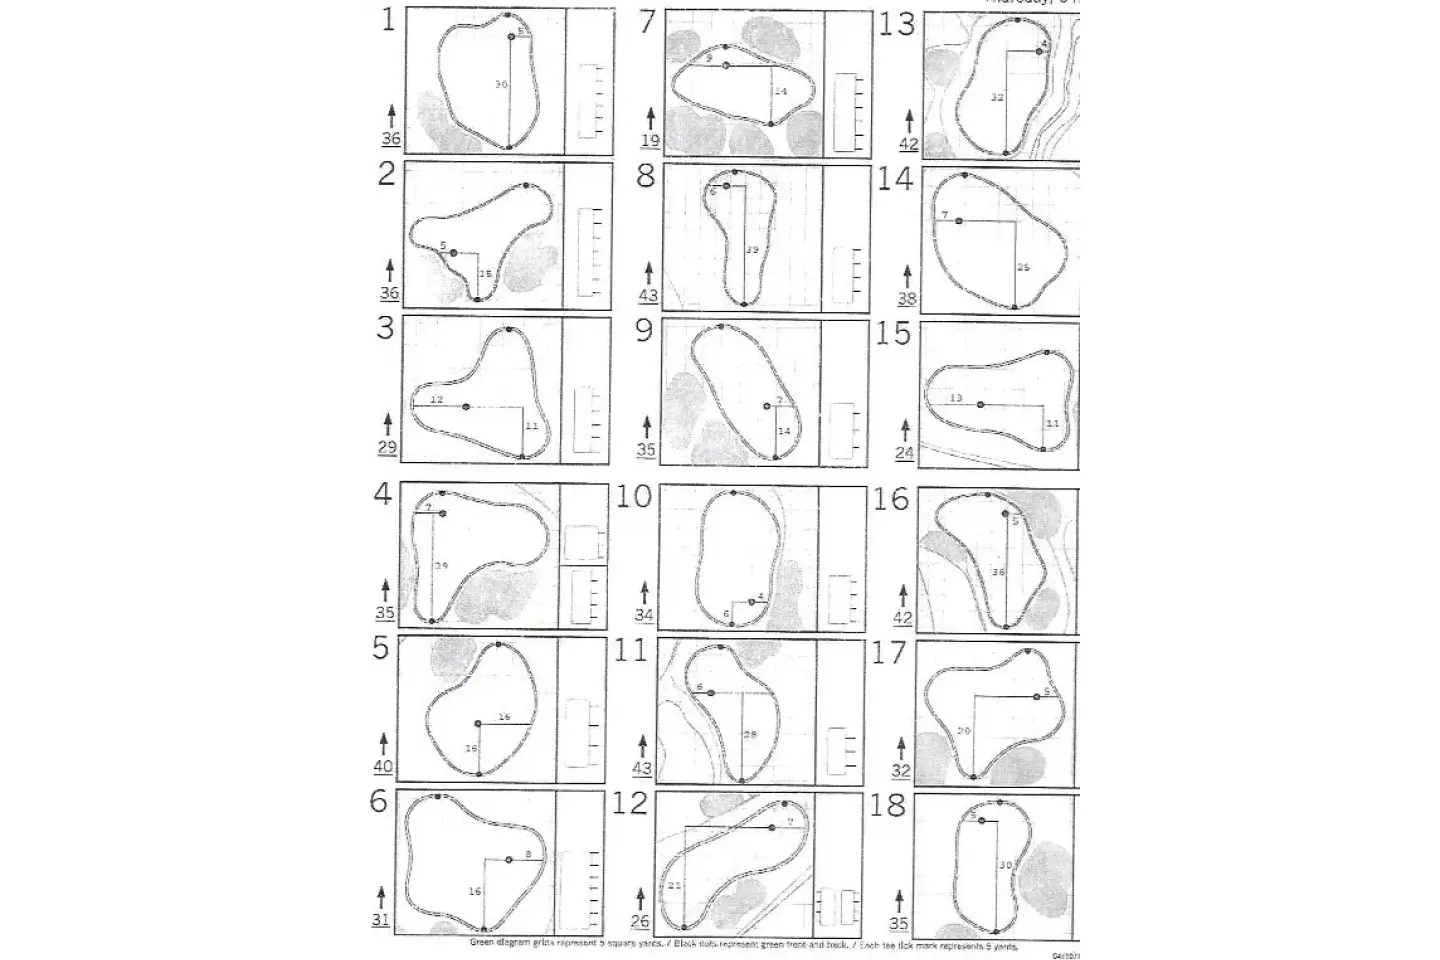 A series of photographs showing the different locations for various types of golf.